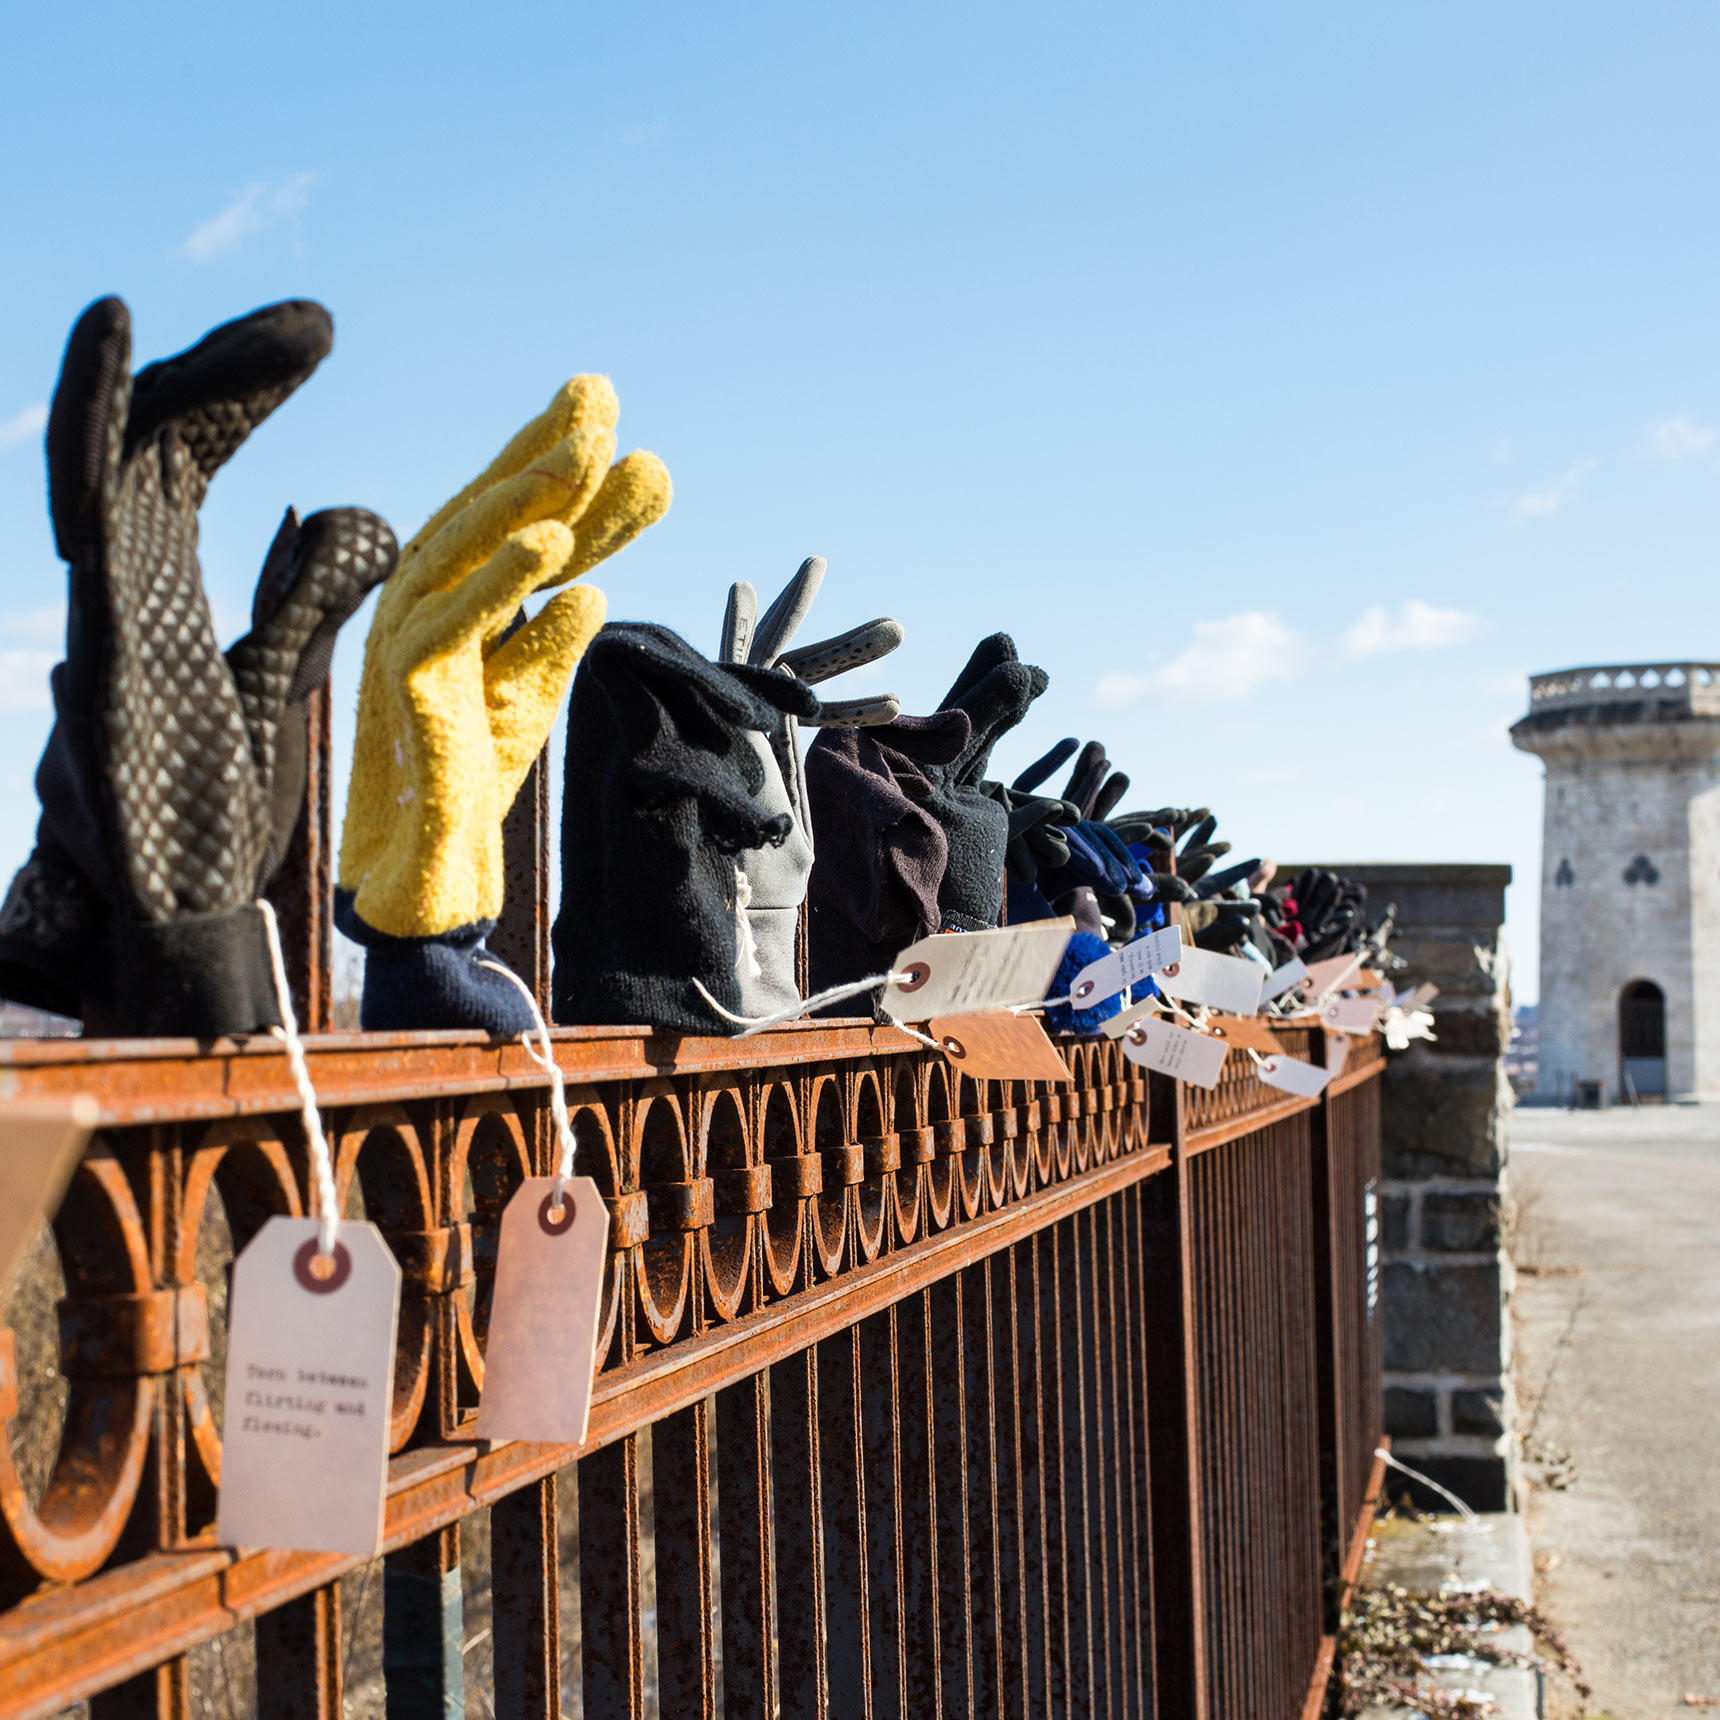 Dozens of found orphaned gloves and mittens displayed on a wrought iron fence in Druid Hill Park as part of the Library of Lost Gloves & Lost Loves participatory public art installation by artist Bruce Willen